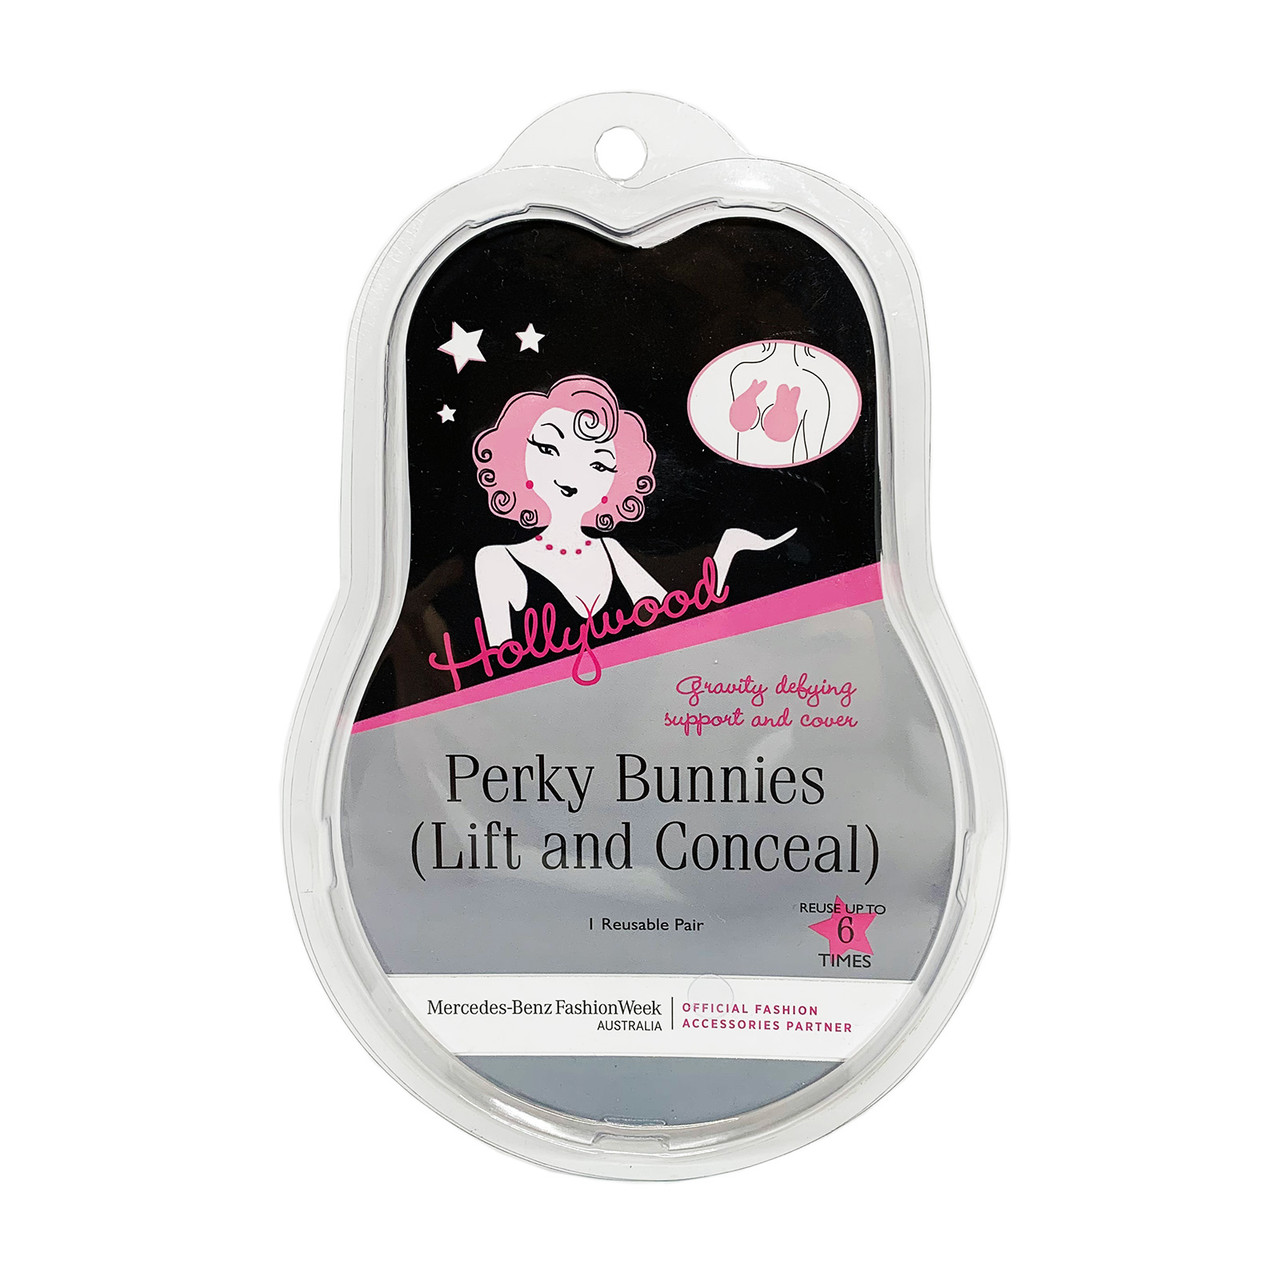 Hollywood Perky Bunnies Lift and Conceal - C/D Cup 1 pair